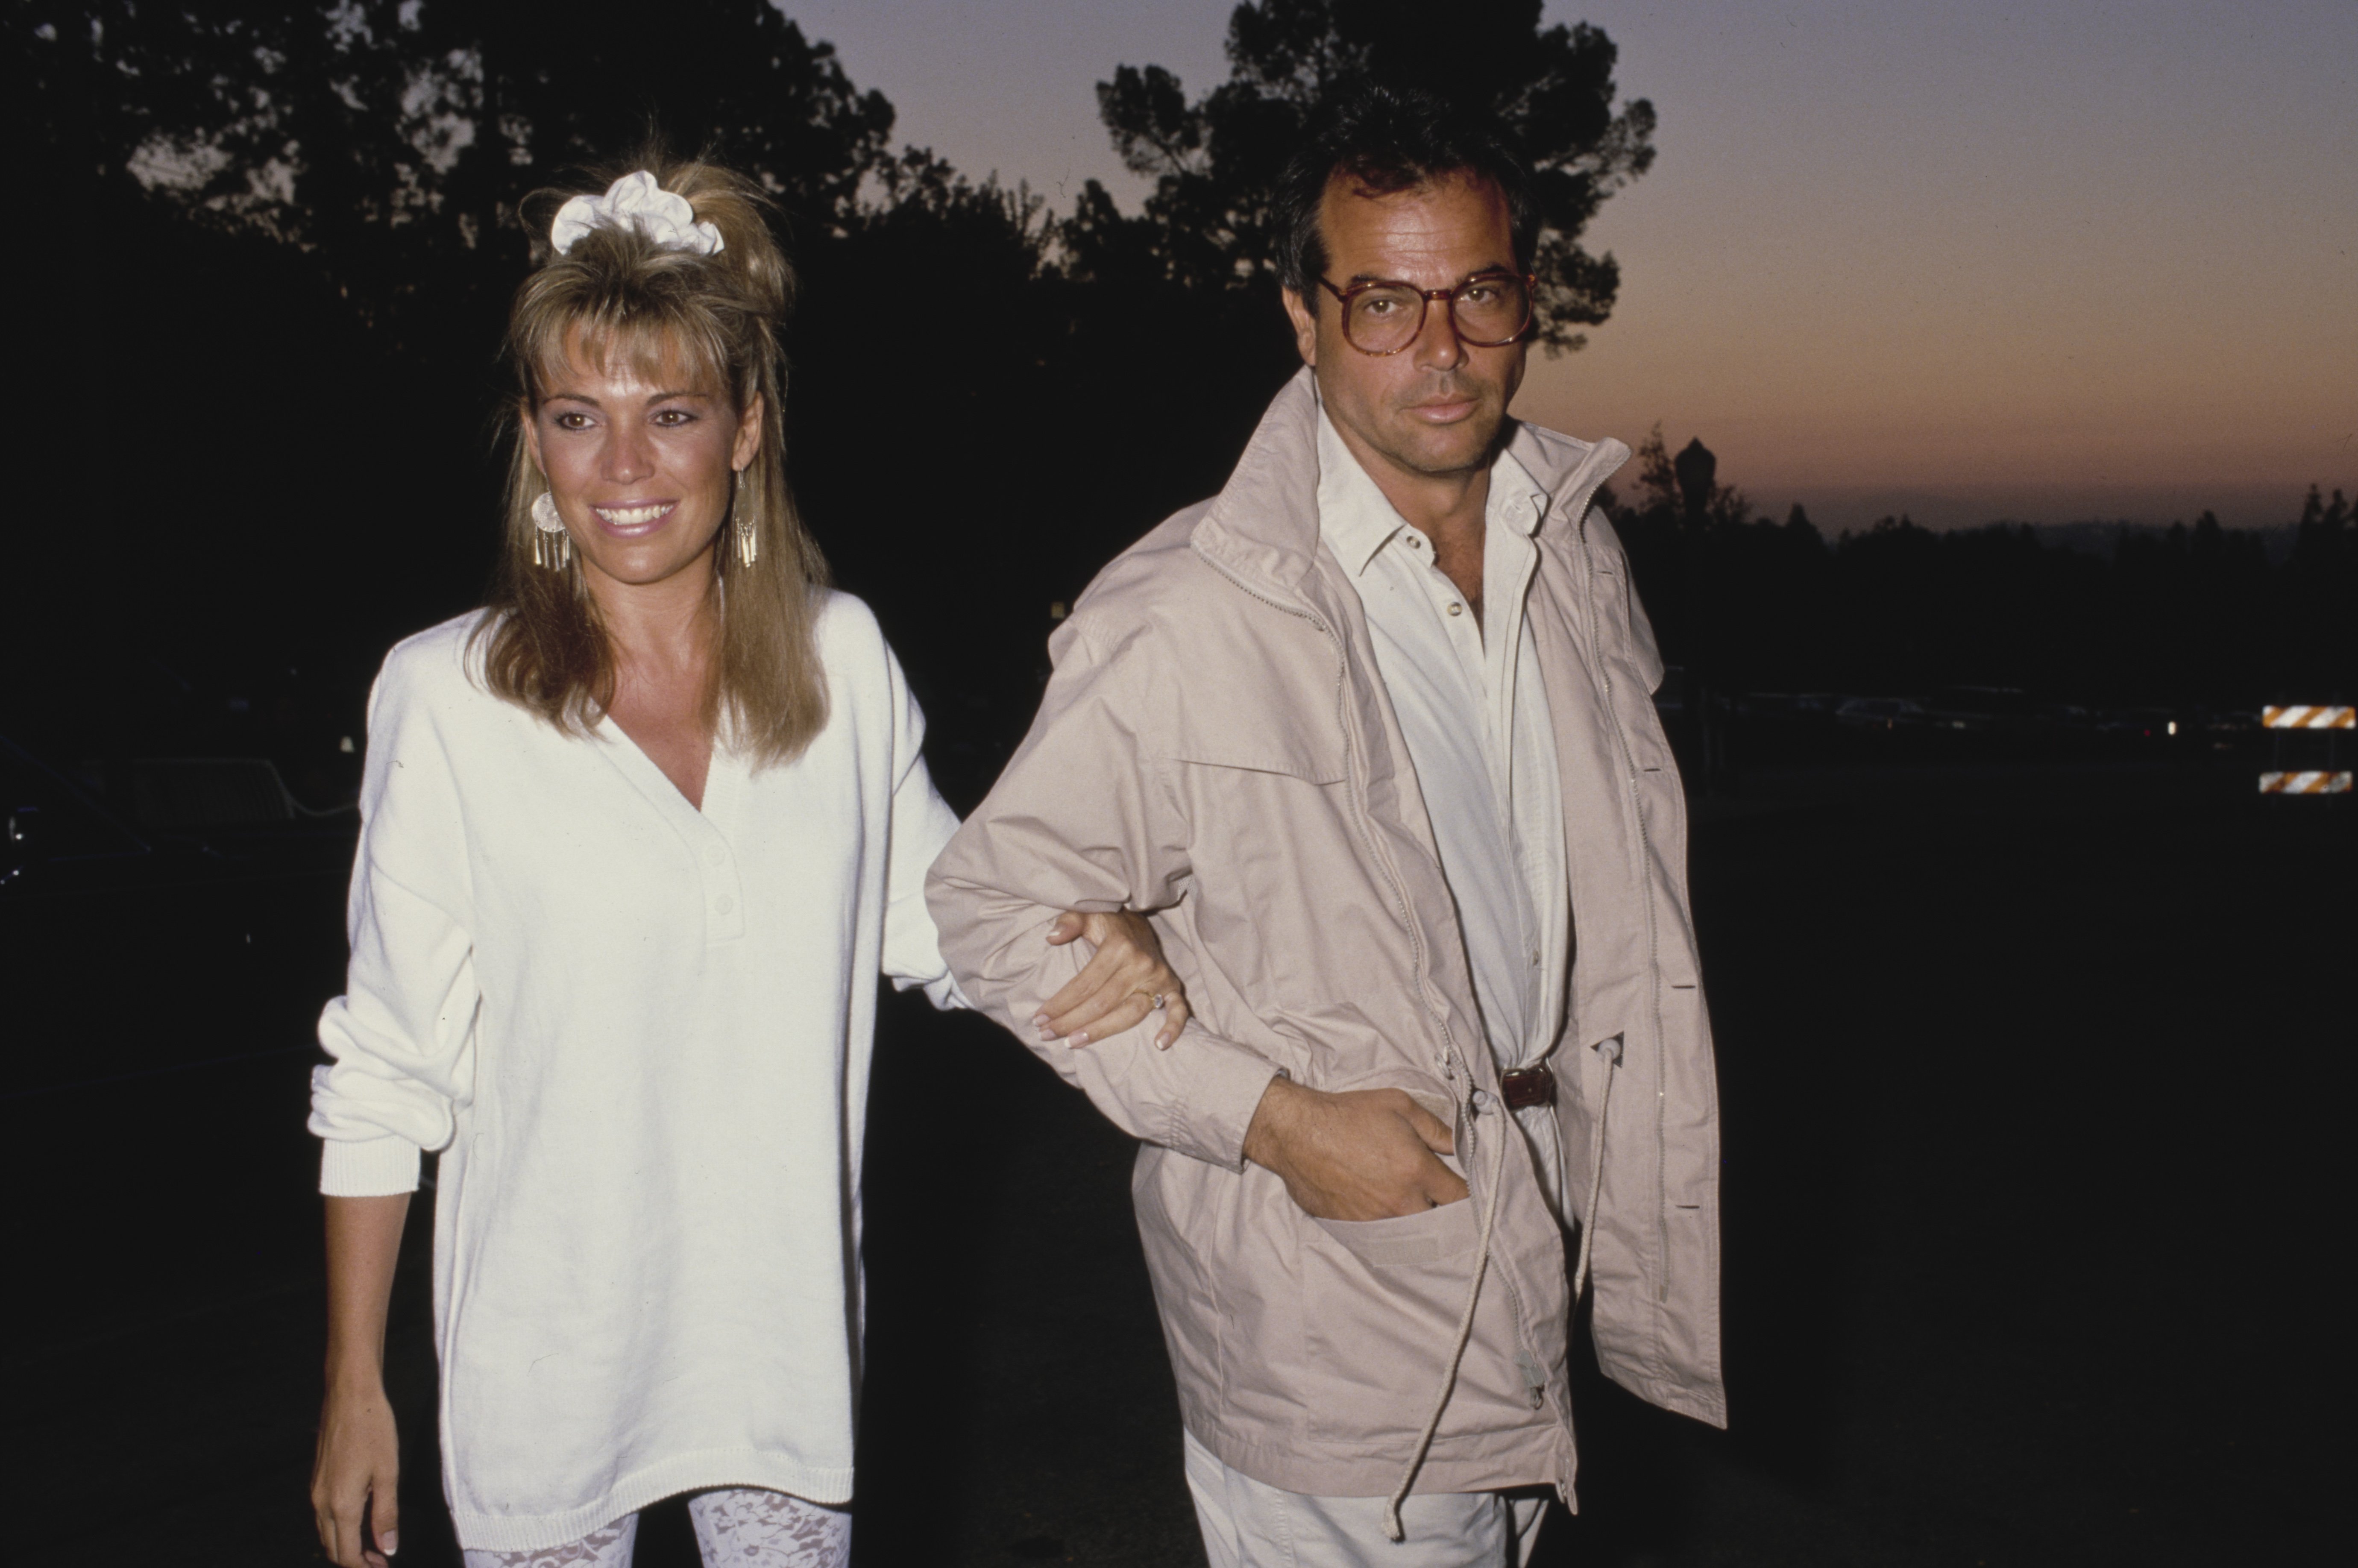 Vanna White and George Santo Pietro attend the Ringo Starr and His All-Starr Band concert on September 4, 1989, in Los Angeles, California. | Source: Getty Images